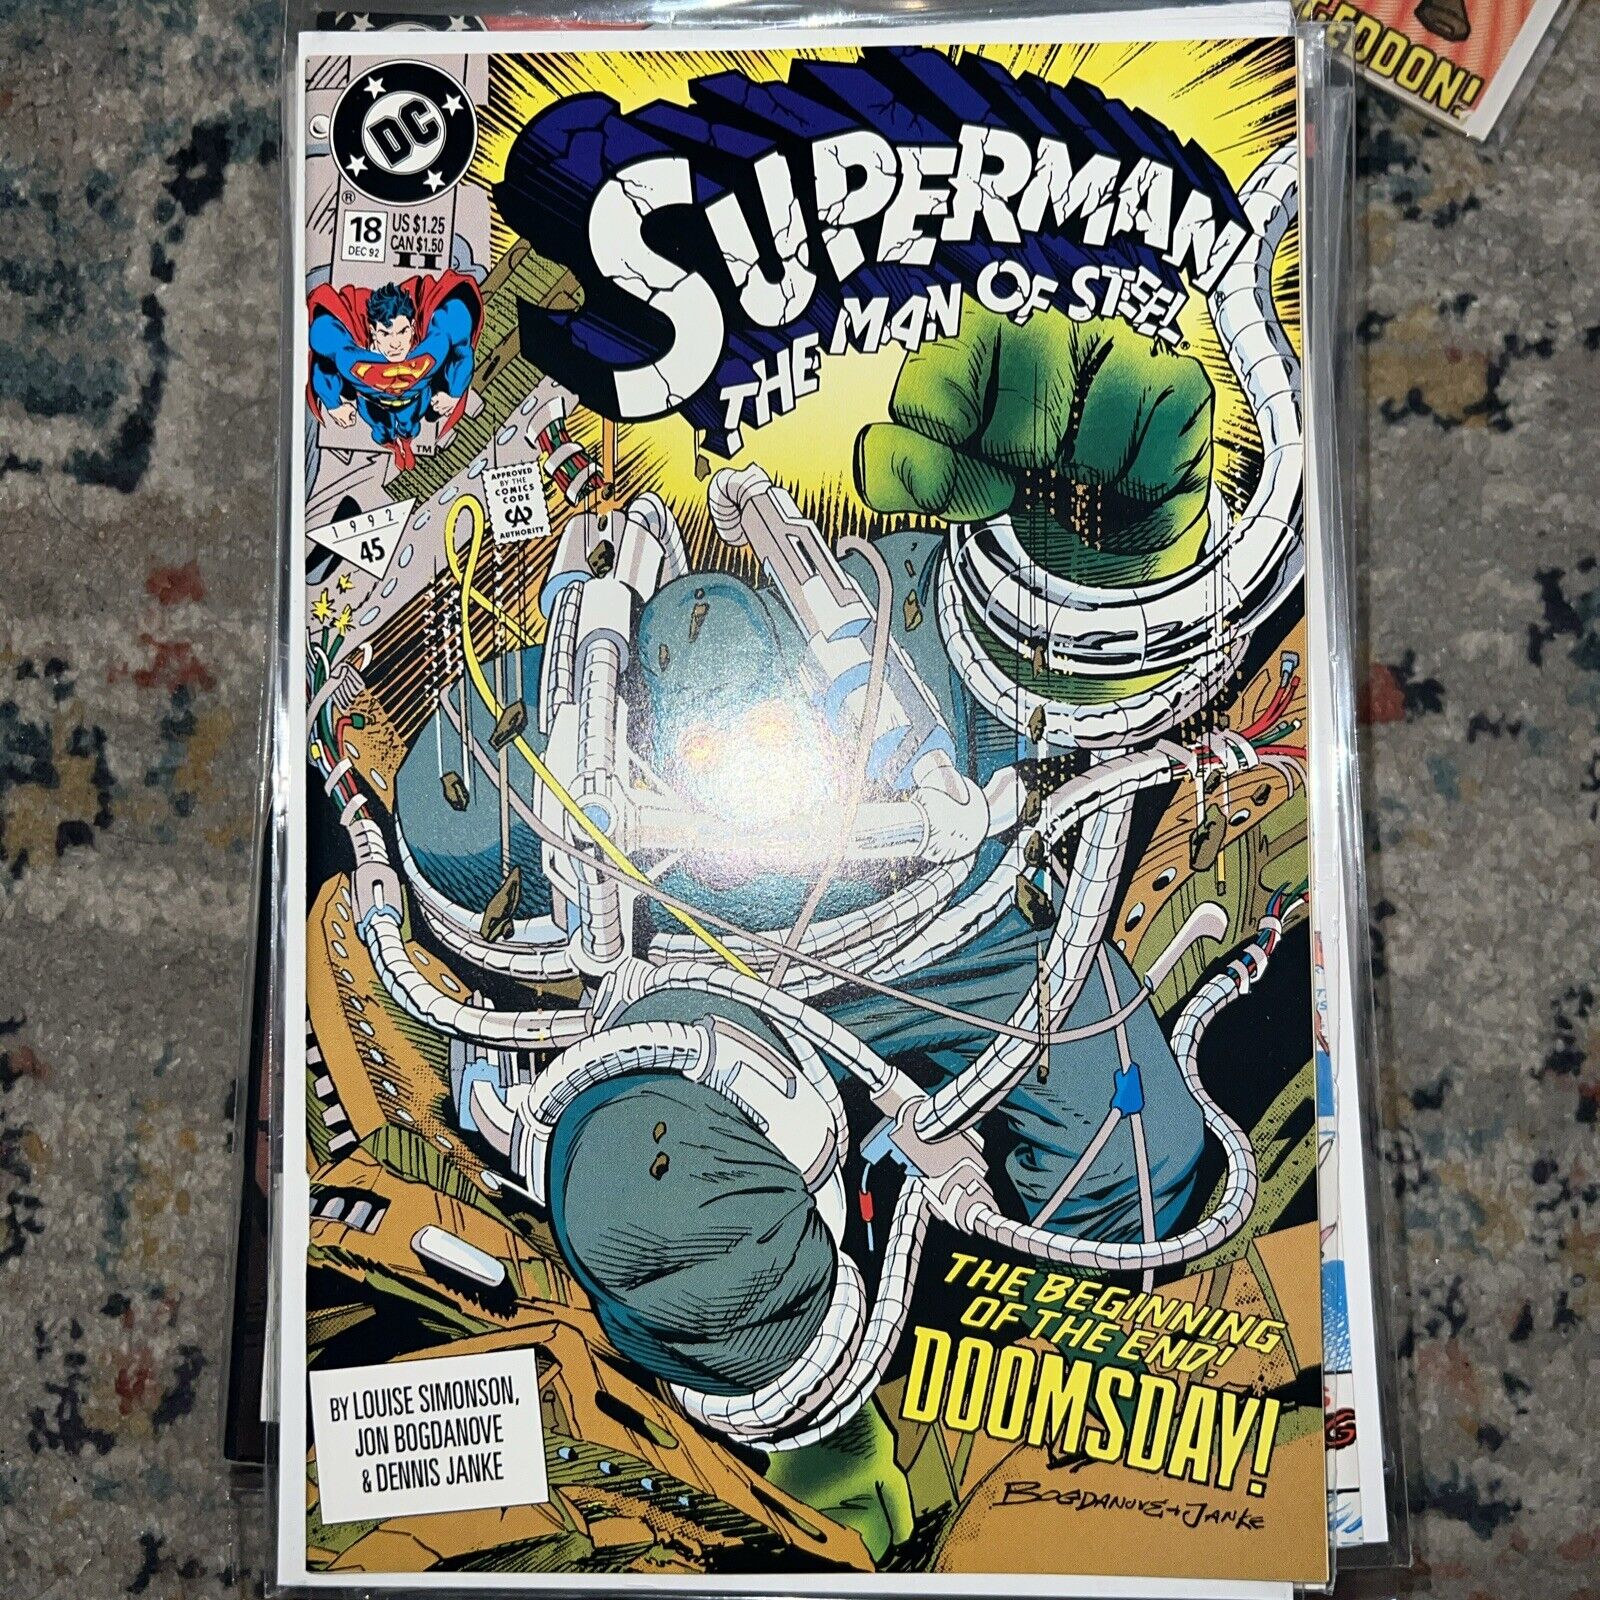 SUPERMAN MAN OF STEEL #18 NM 1992 1ST FULL APPEARANCE Of DOOMSDAY 2ND PRINT